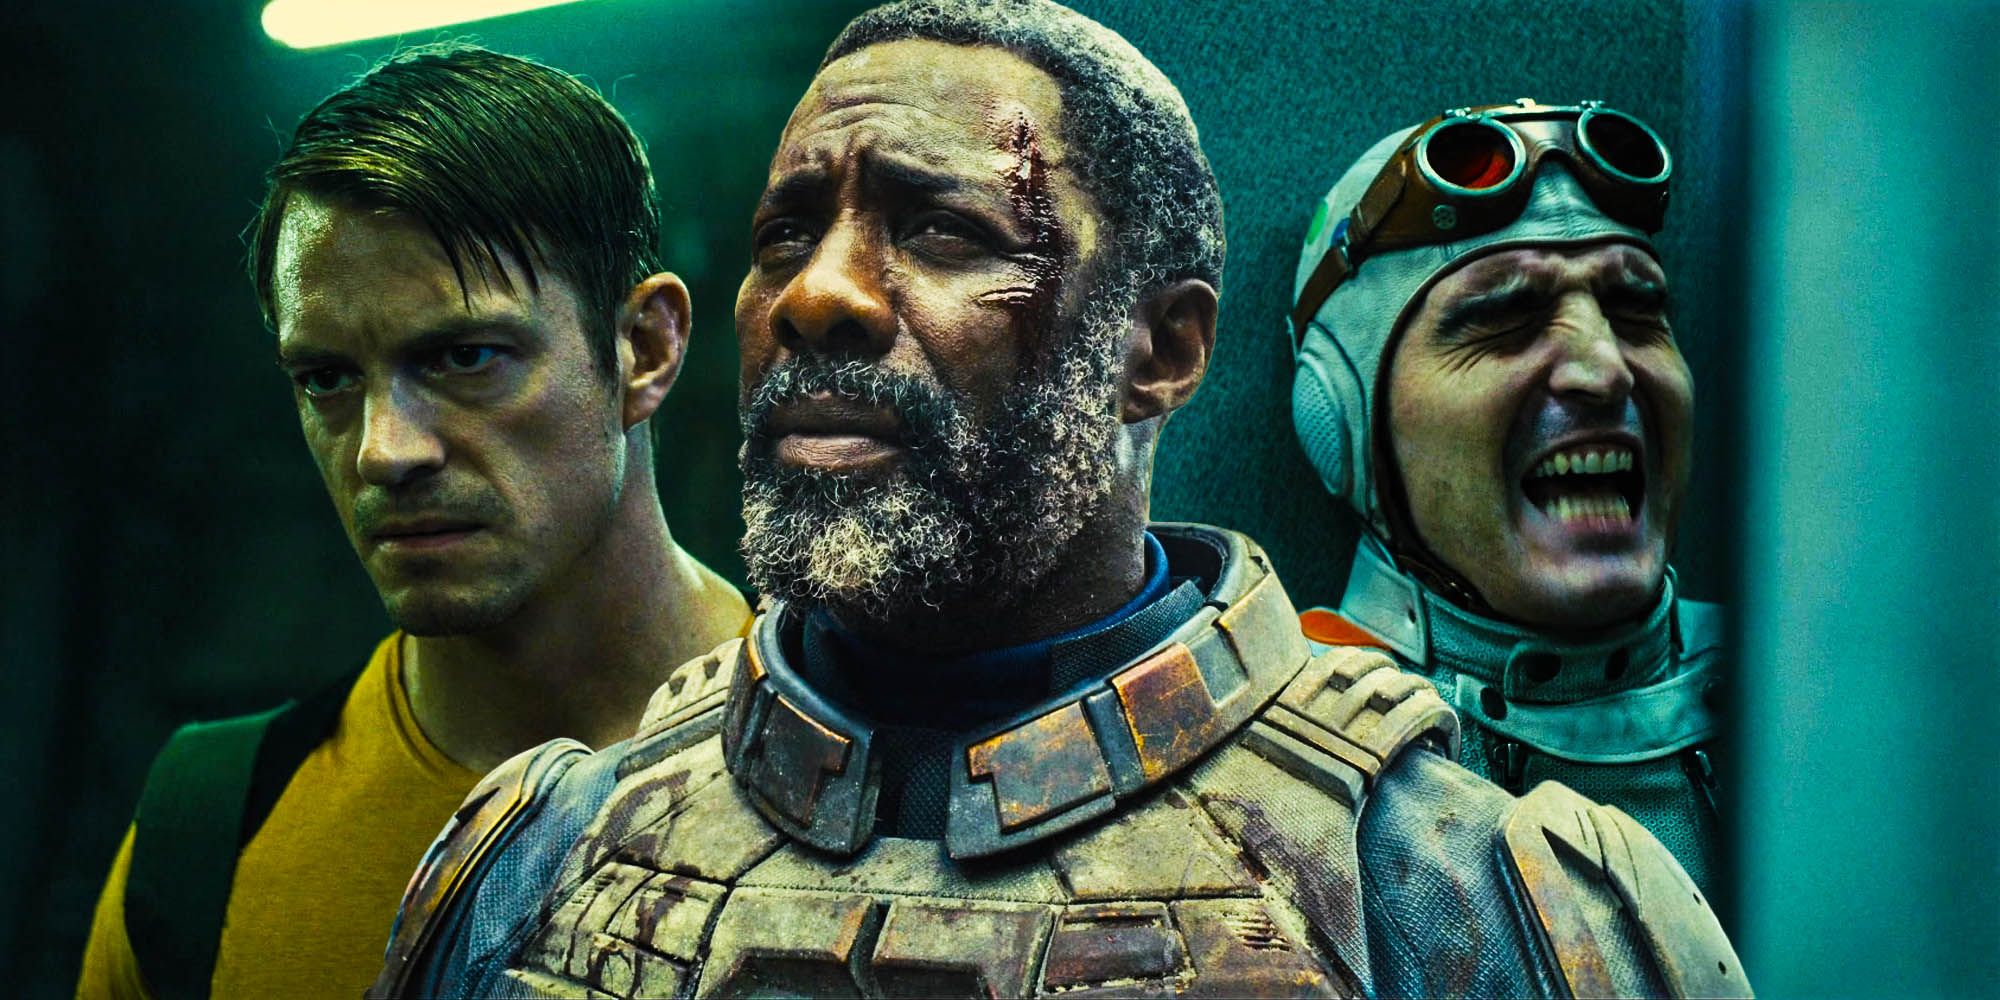 Suicide Squad spoiled a major death flagg